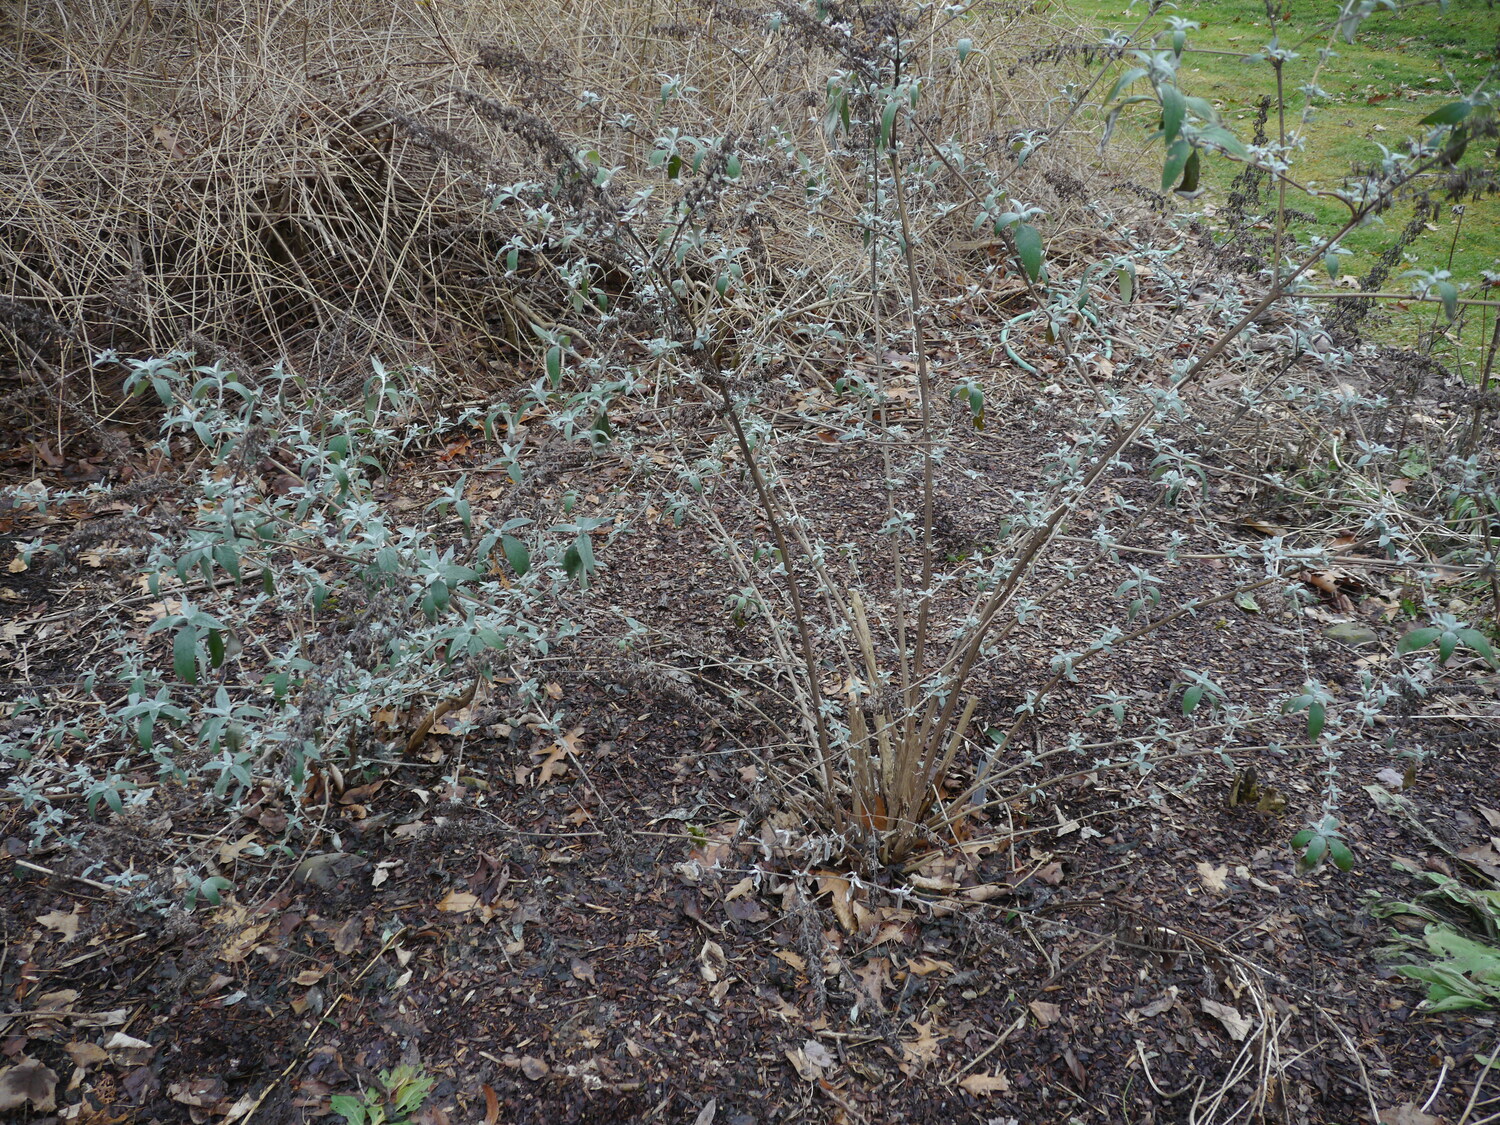 This is what you can expect a Buddleia to look like in December. You might be tempted to prune it but let it be unlil mid to late March then cut and thin the stems so what’s left is about a foot tall.
ANDREW MESSINGER